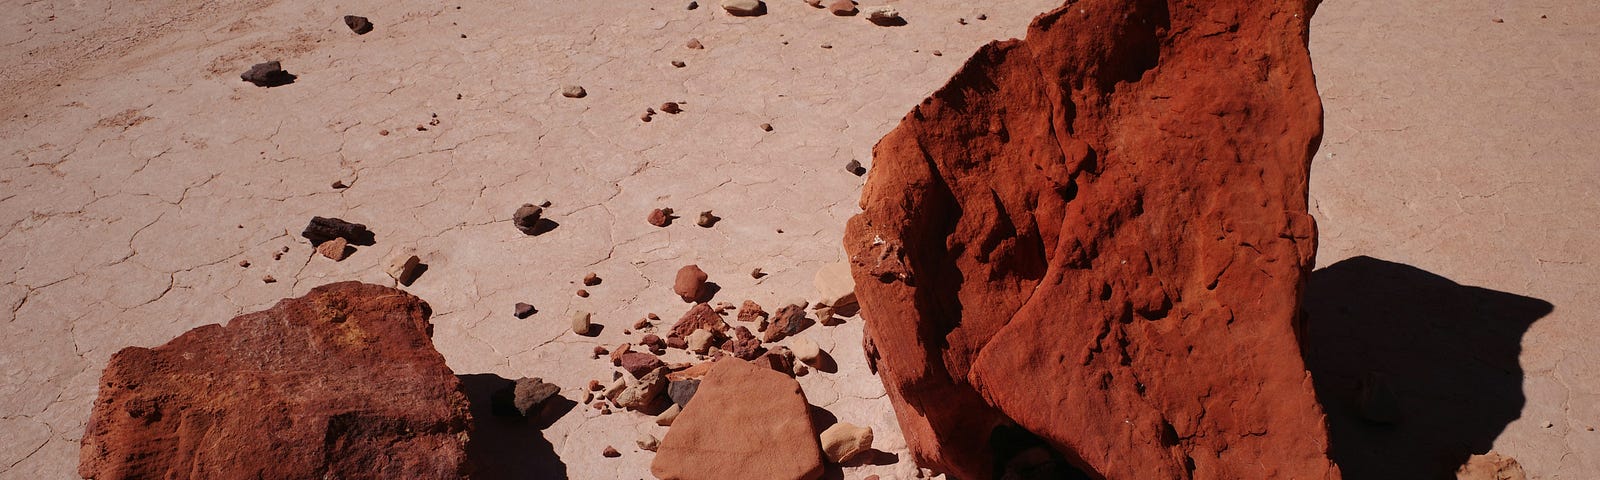 An image of large red clay/mud pieces on a barren ground.